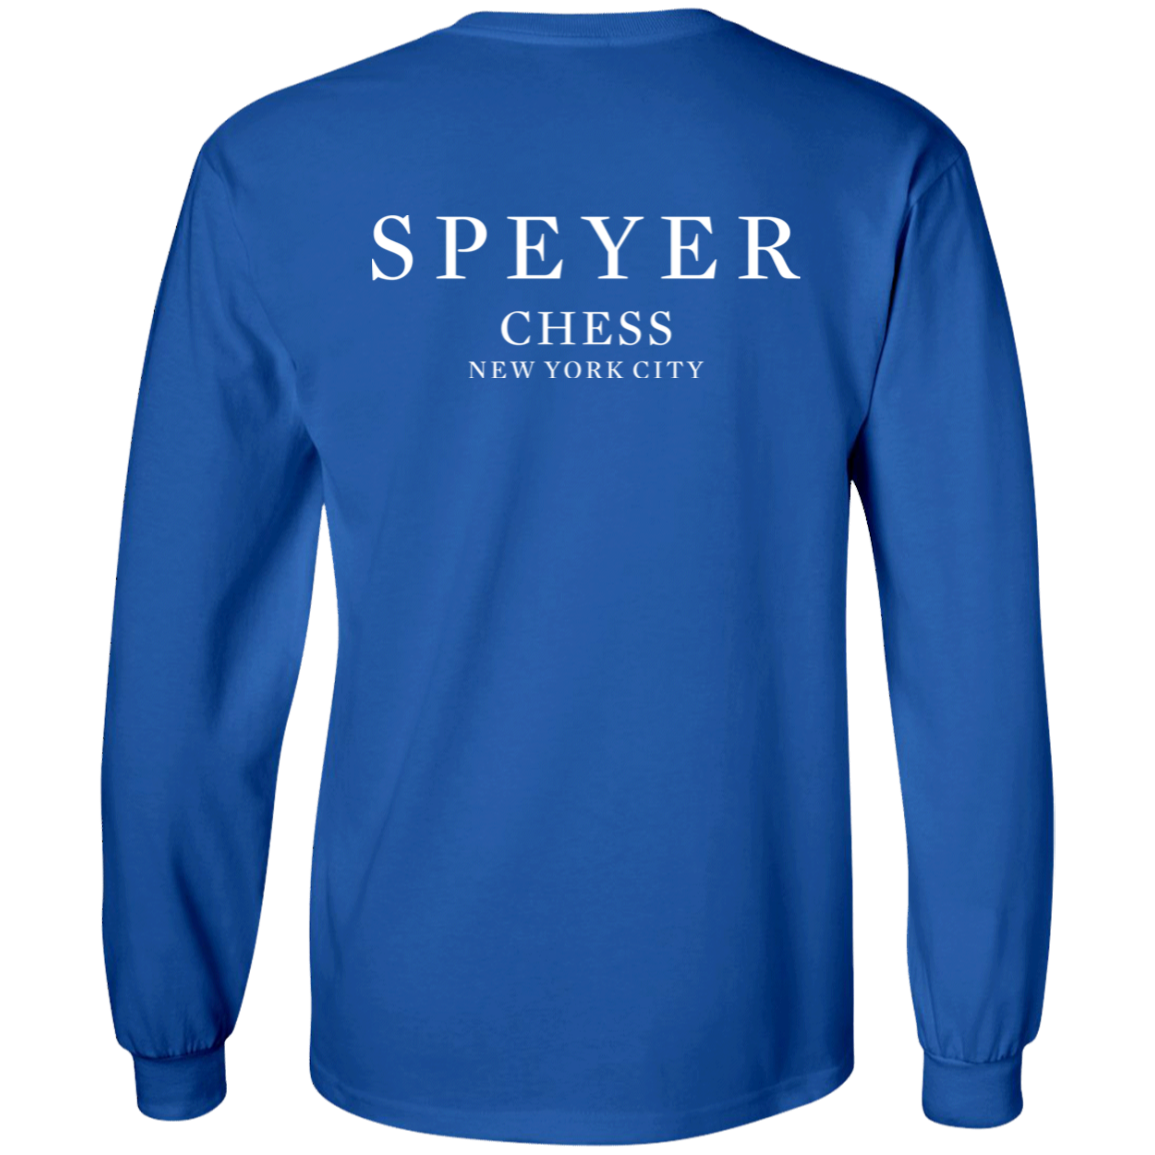 Speyer Chess Long Sleeve T-Shirt, Youth Sizes